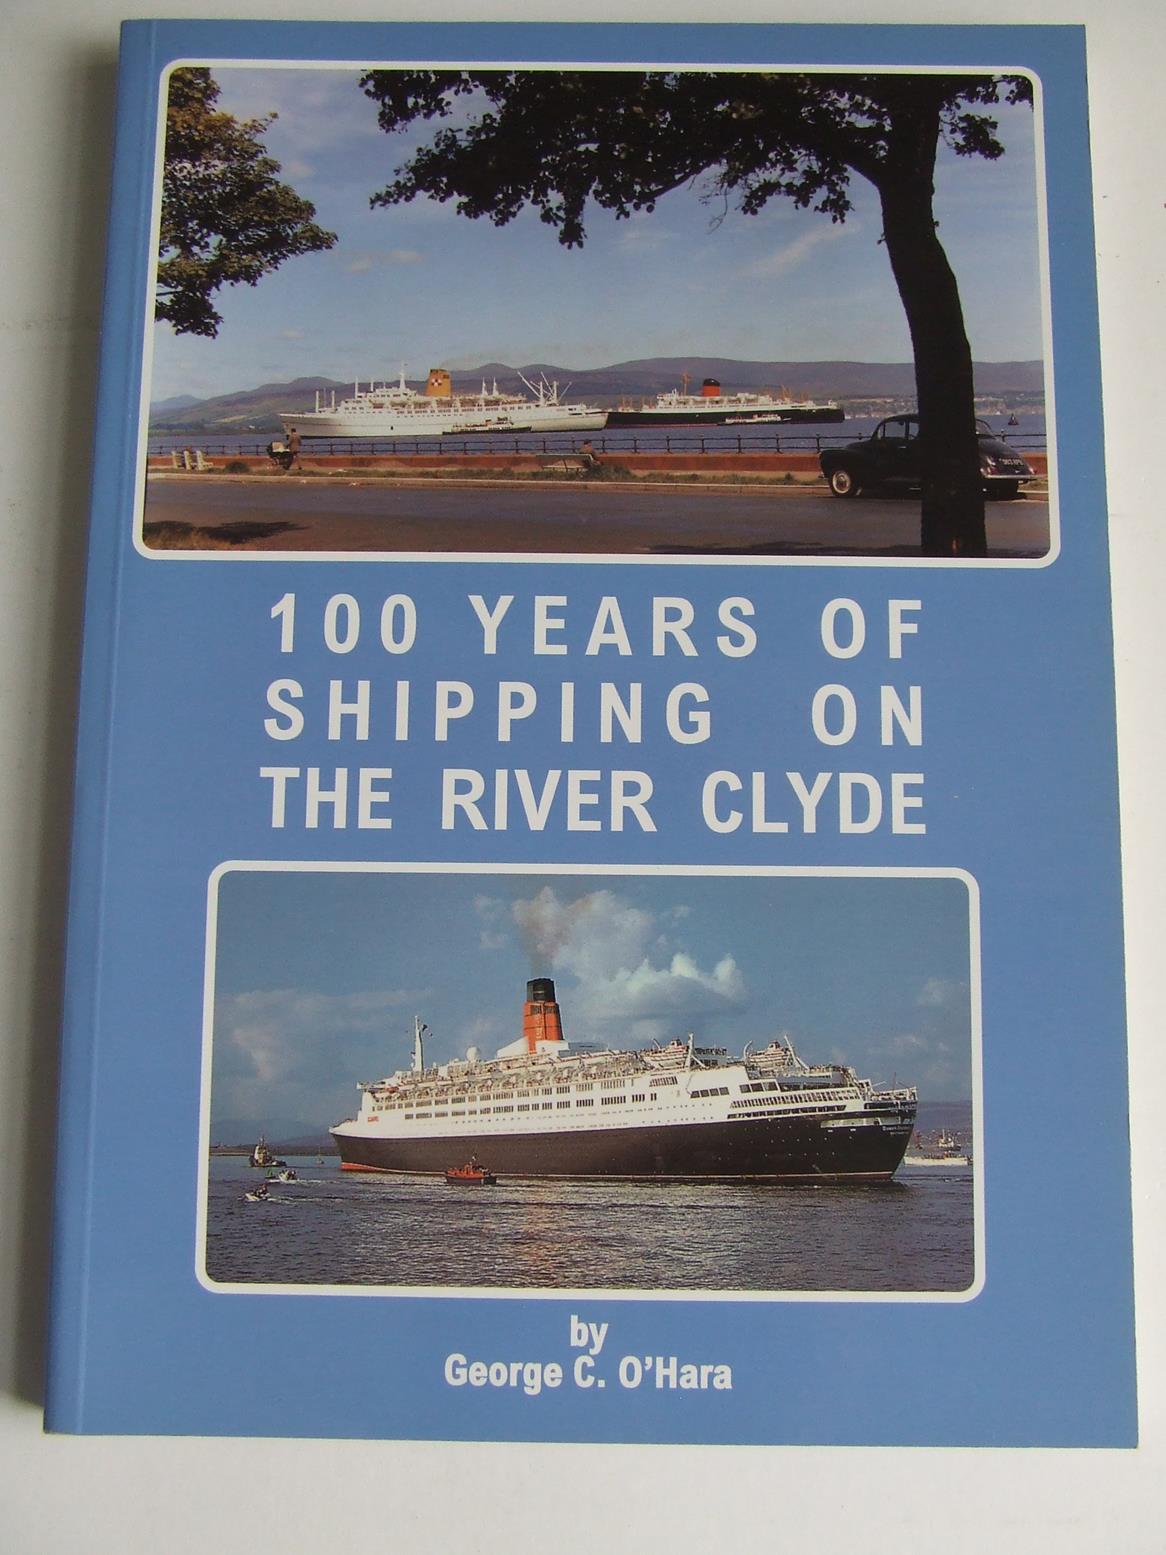 100 Years of Shipping on the River Clyde